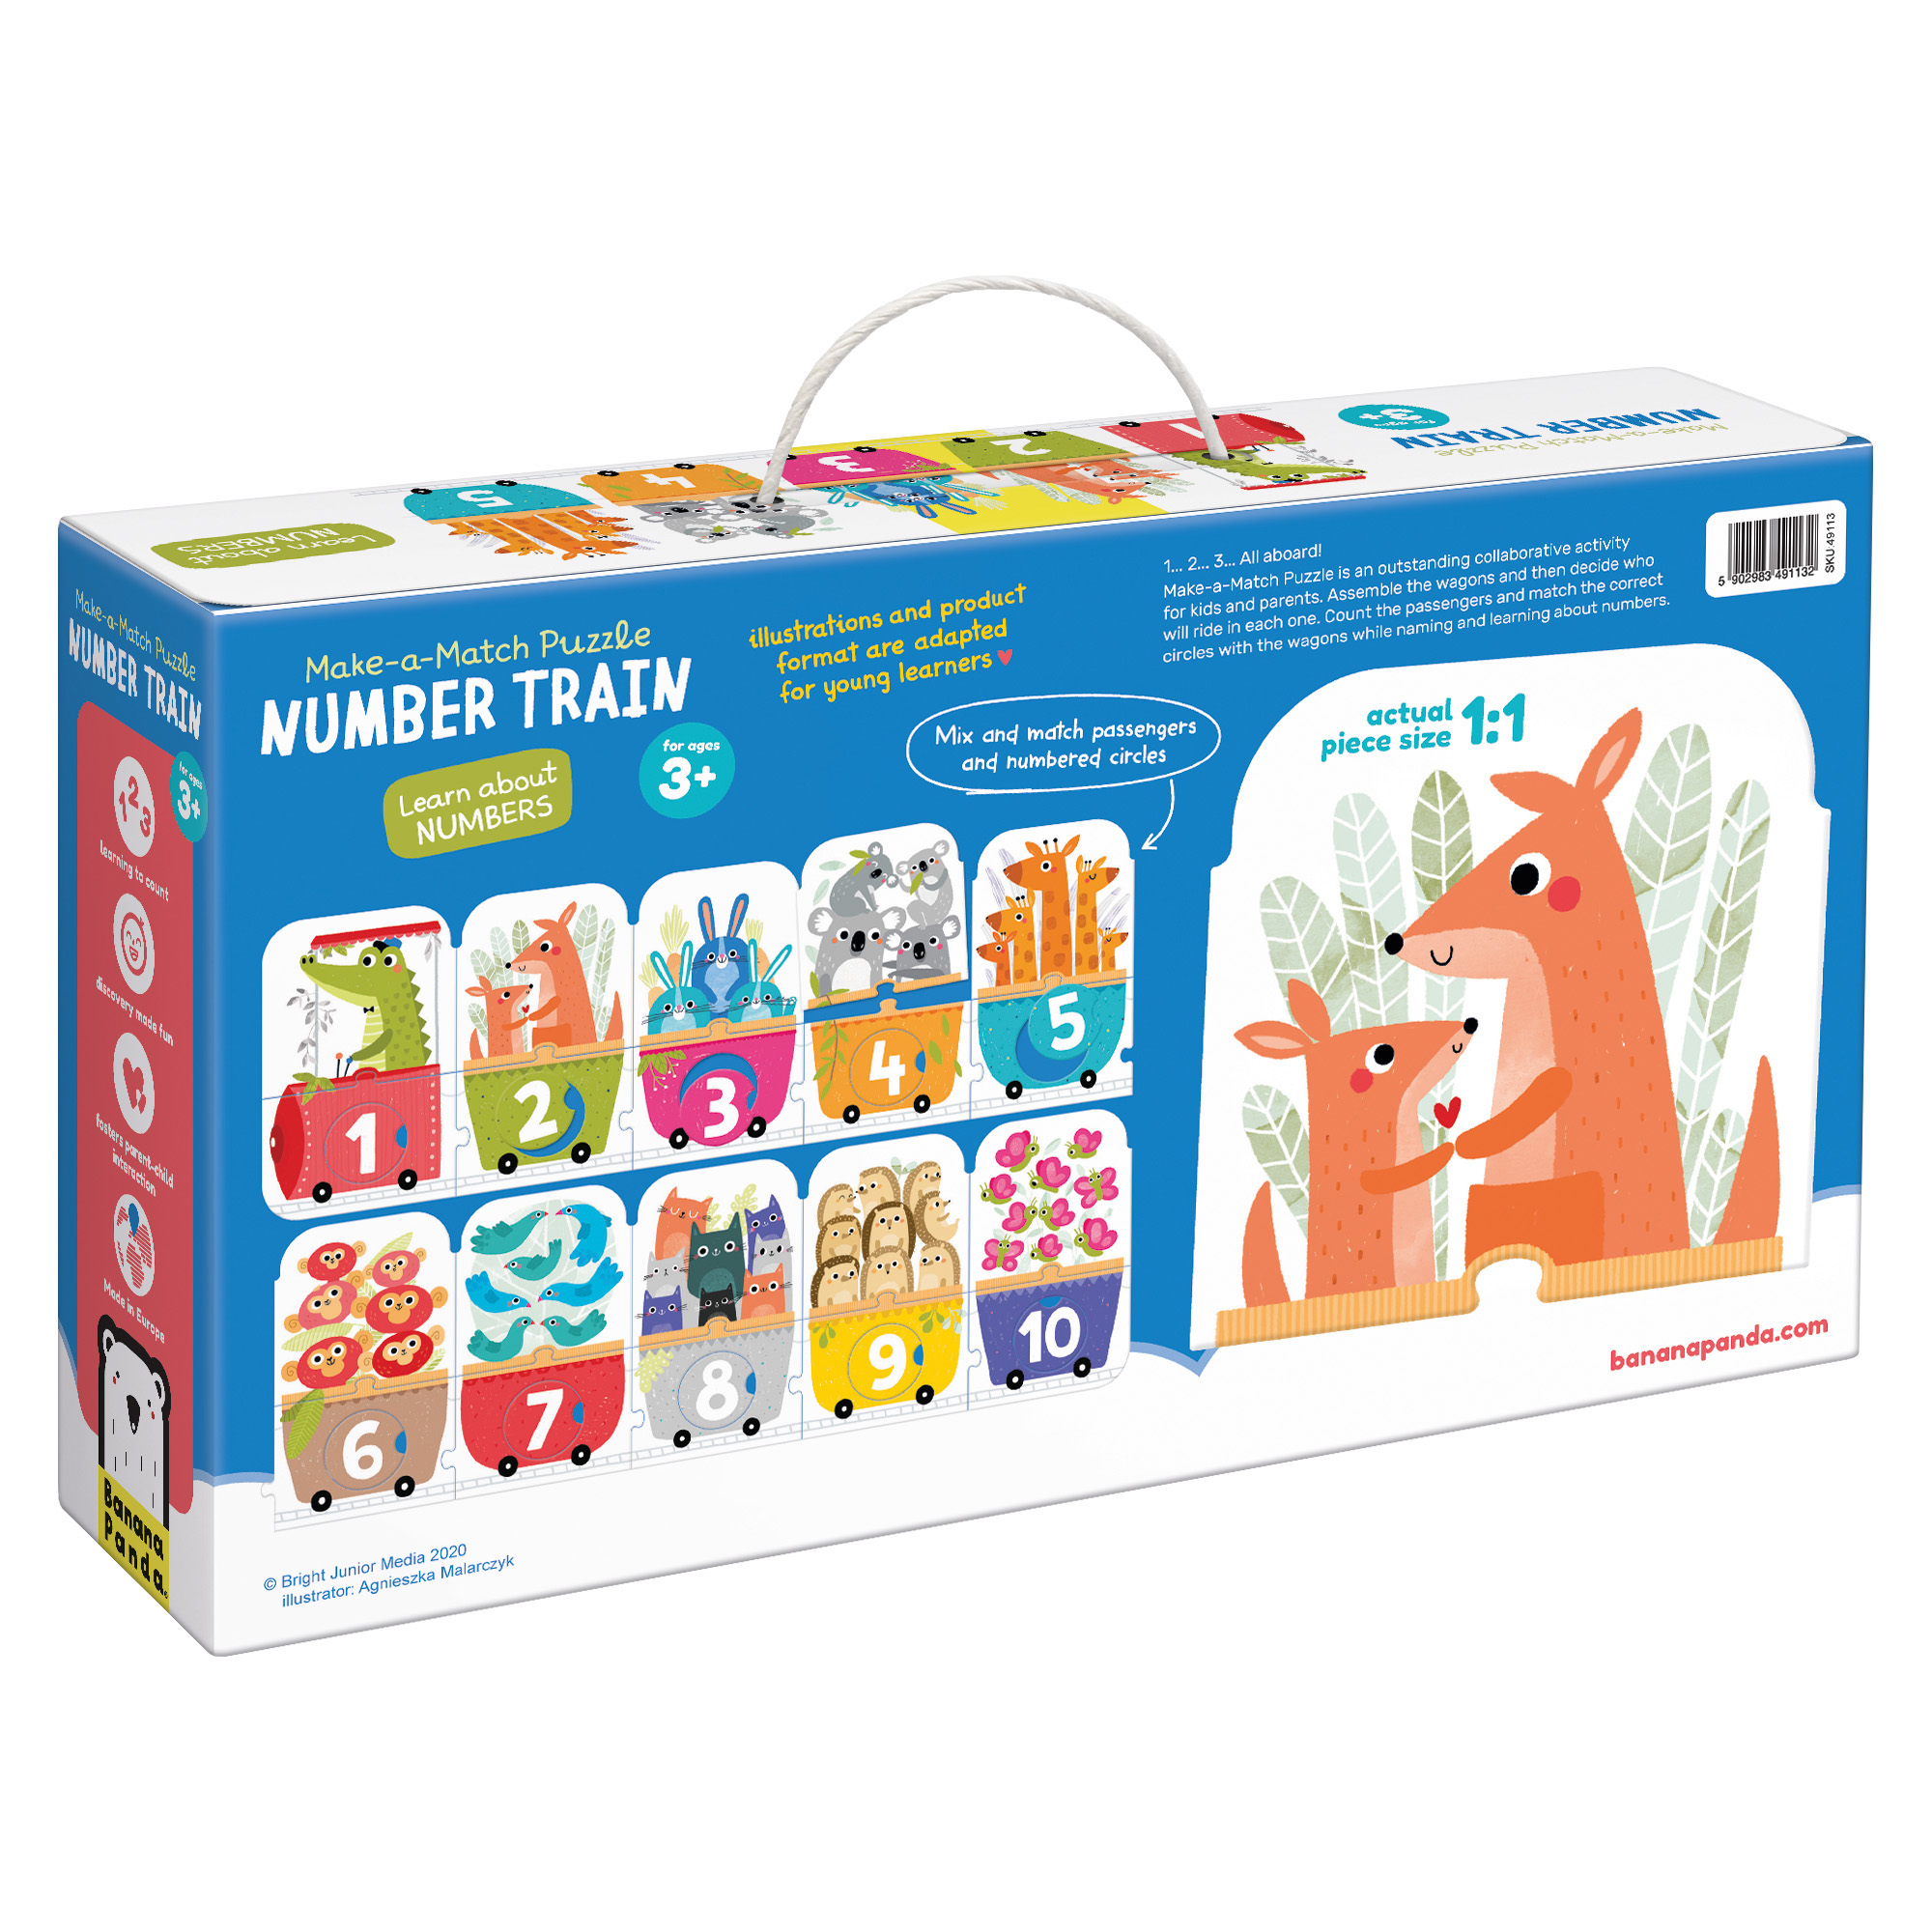 Make-a-Match Number Train Puzzle, 30 Pieces, Mardel